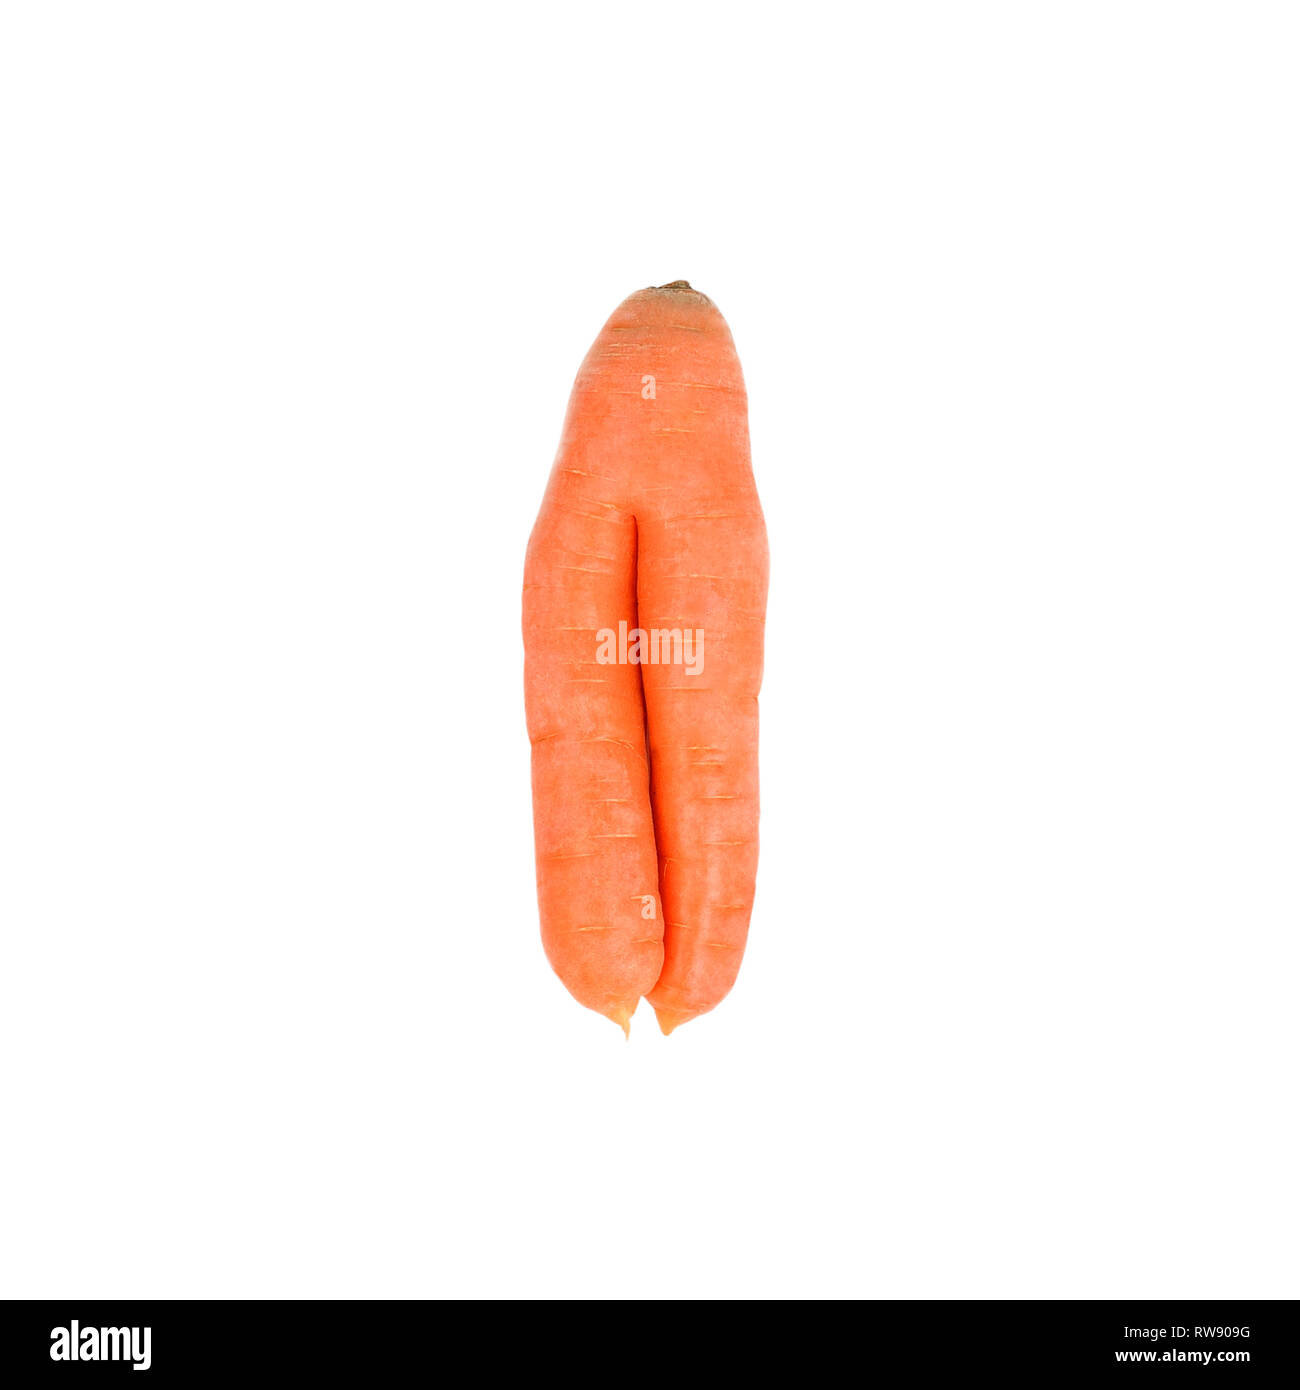 Ugly food .It taste just as good as perfect-looking food .Nutritious and delicious as all the other carrots. Stock Photo